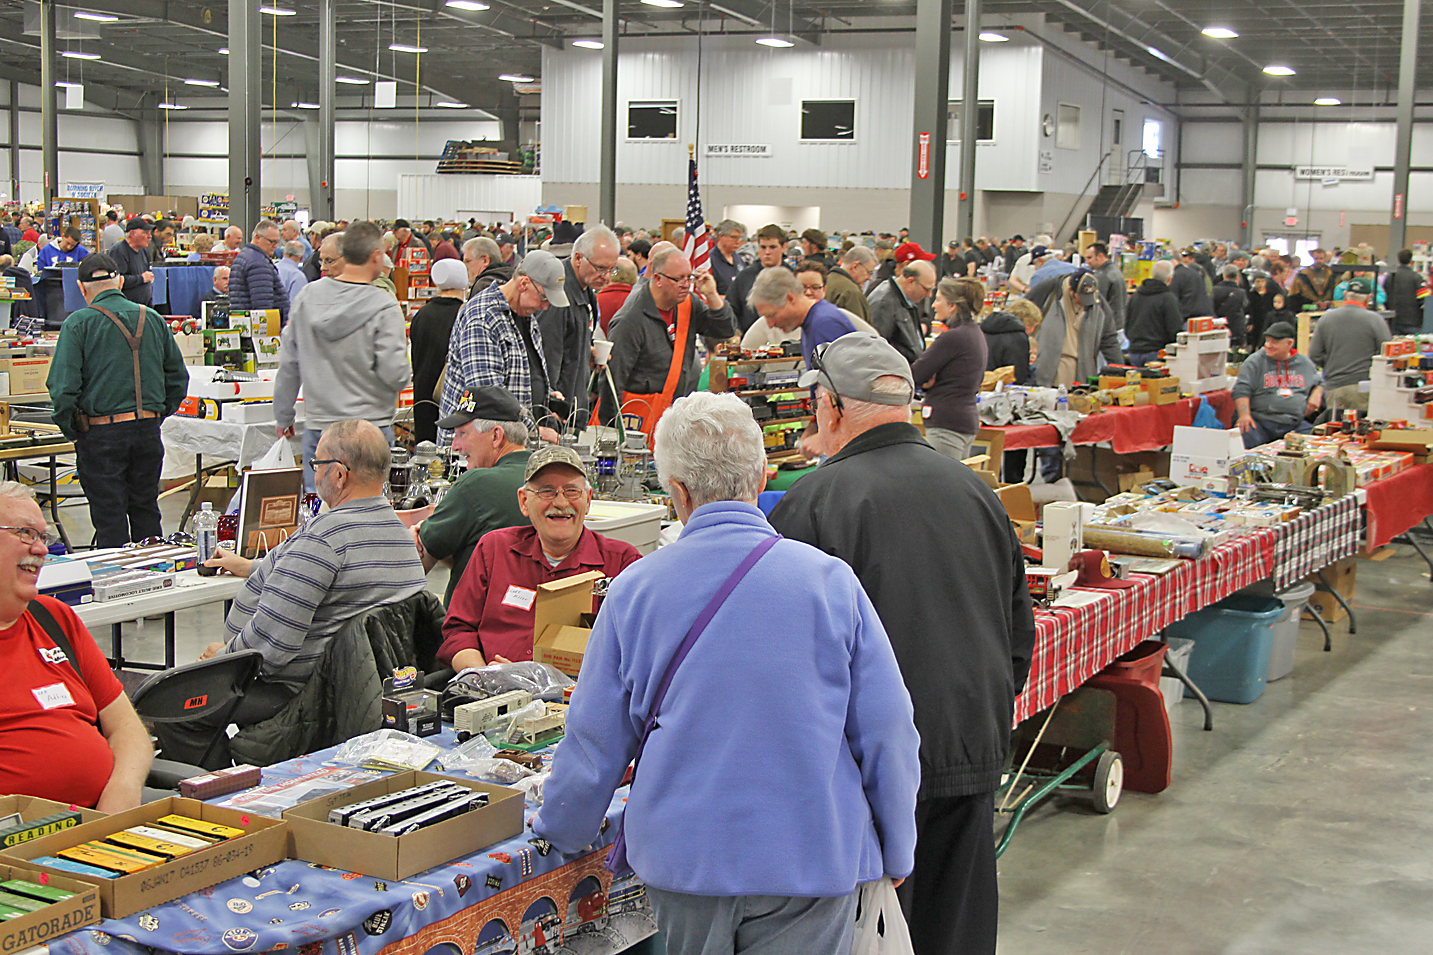 Mt Hope Train And Toy Show